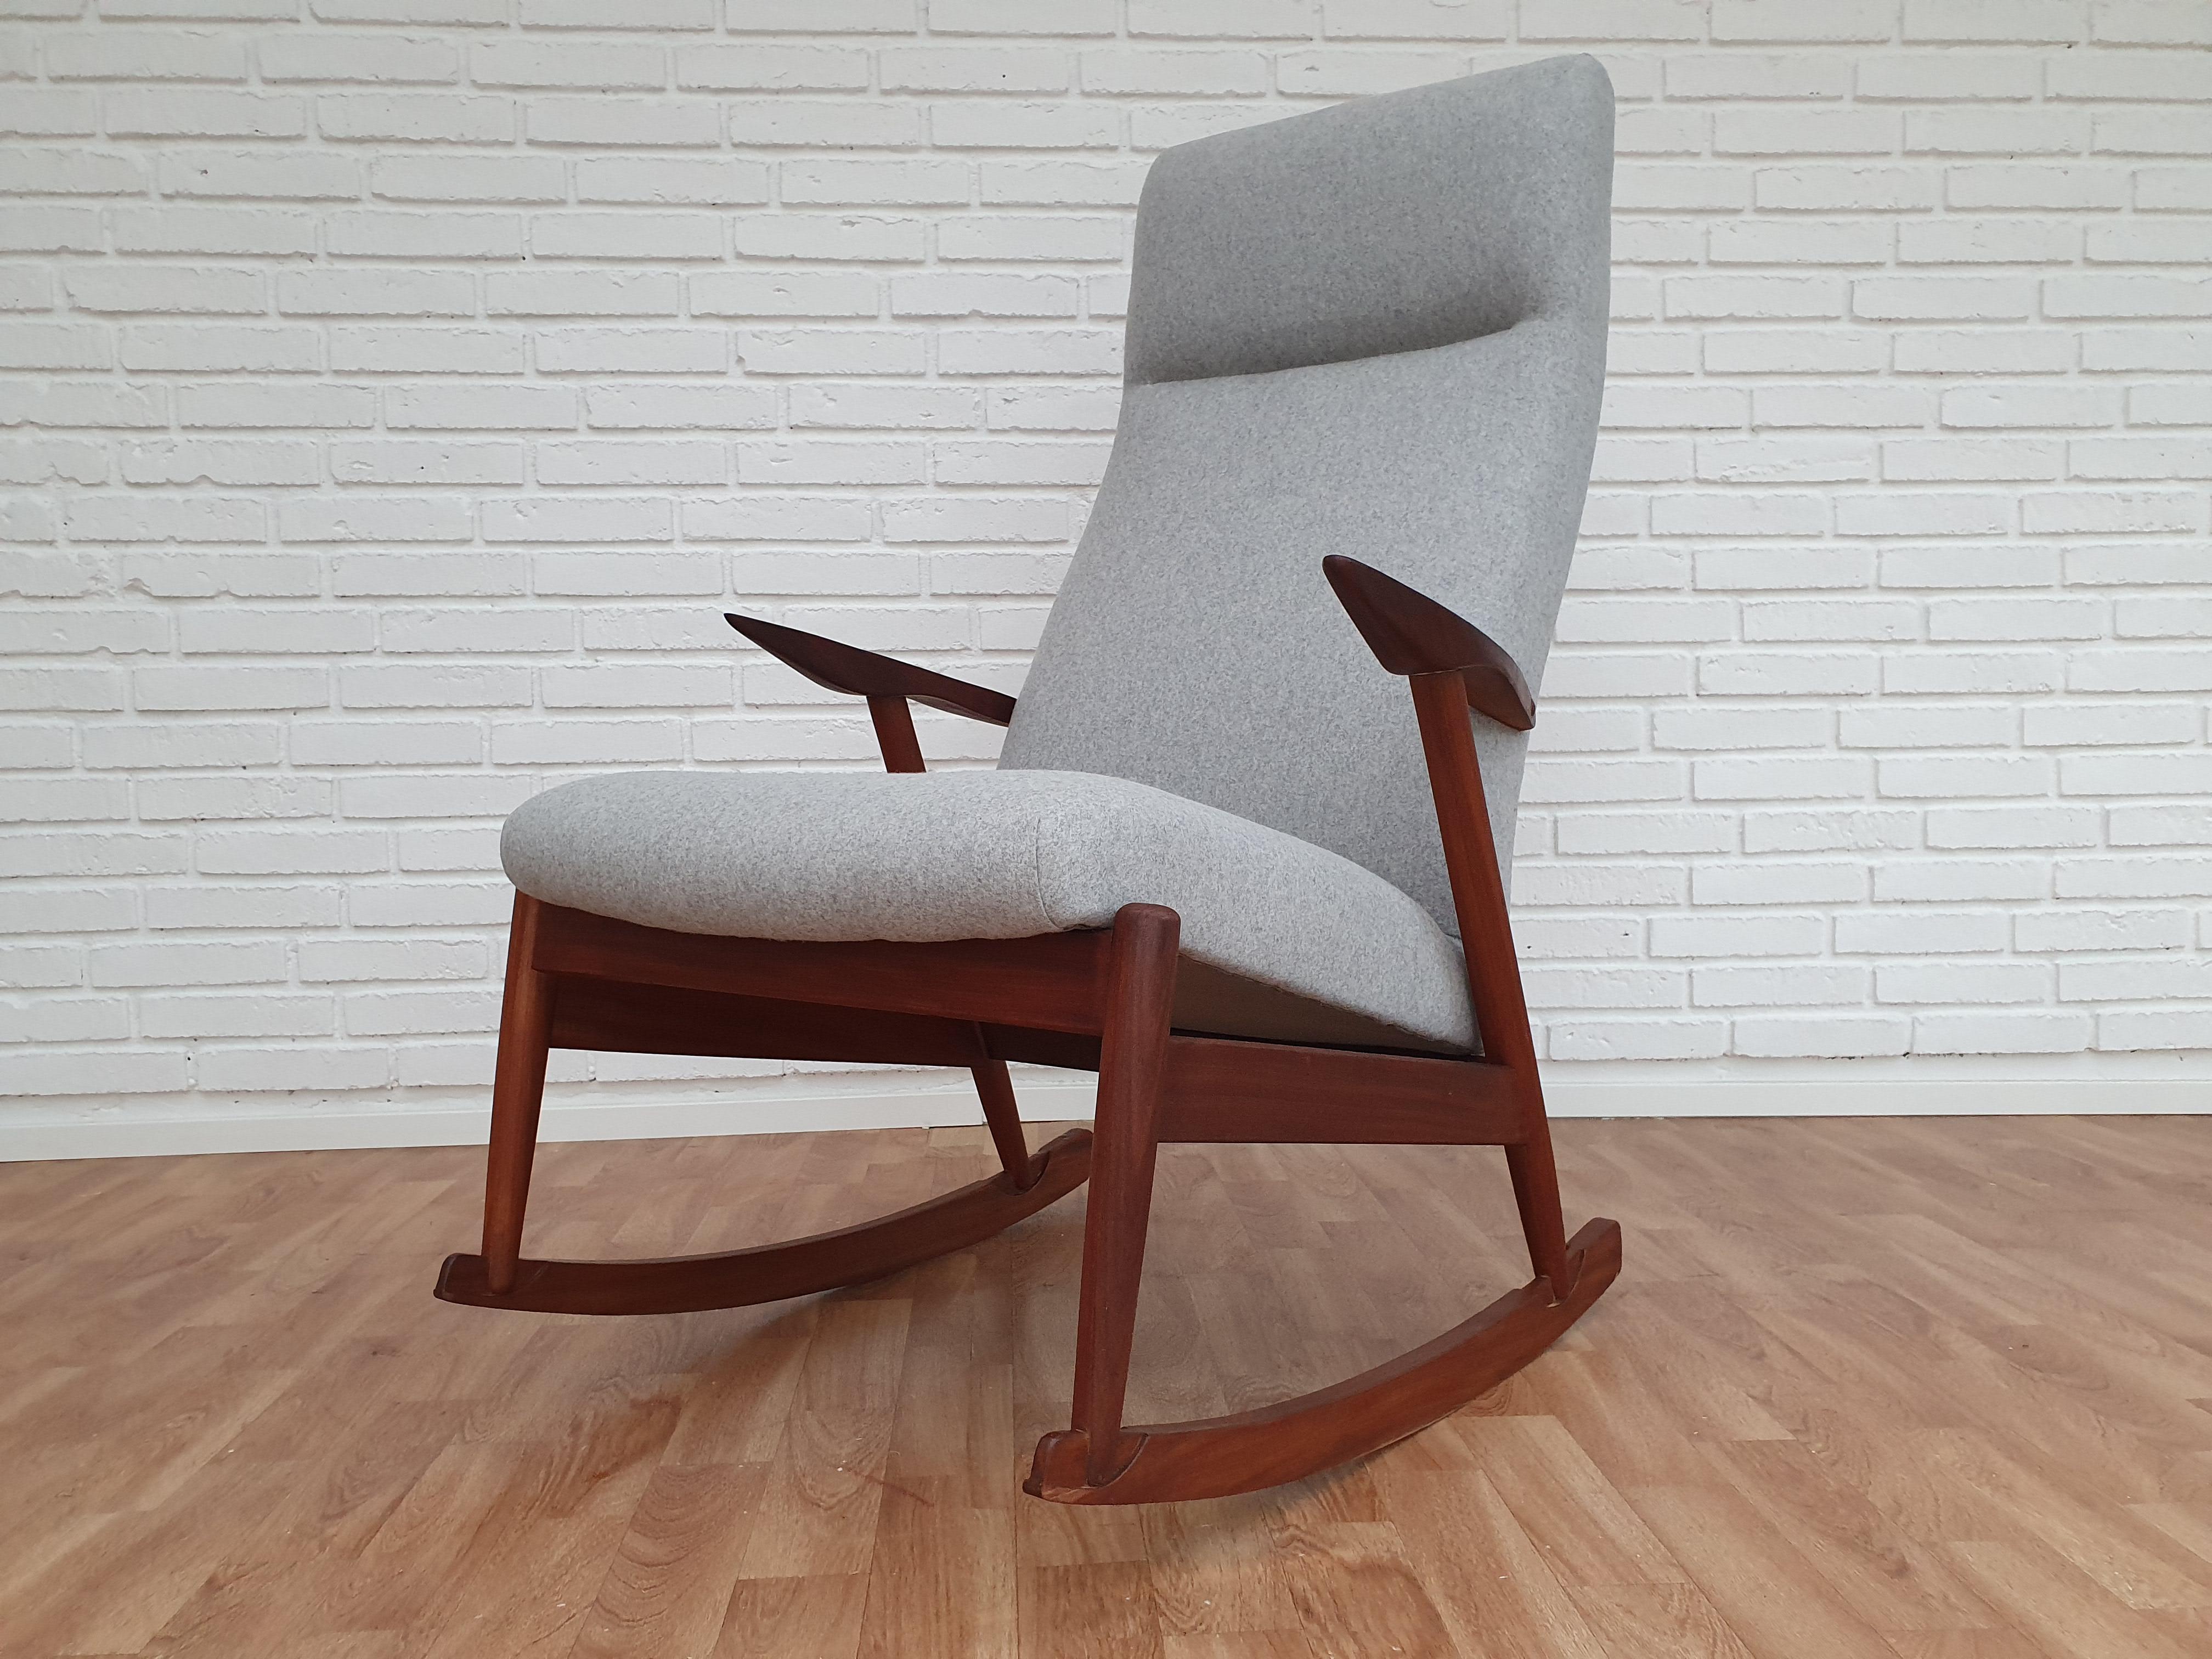 Mid-20th Century Scandinavian Rocking Chair, Teak Wood, 1960s, Completely Renovated For Sale